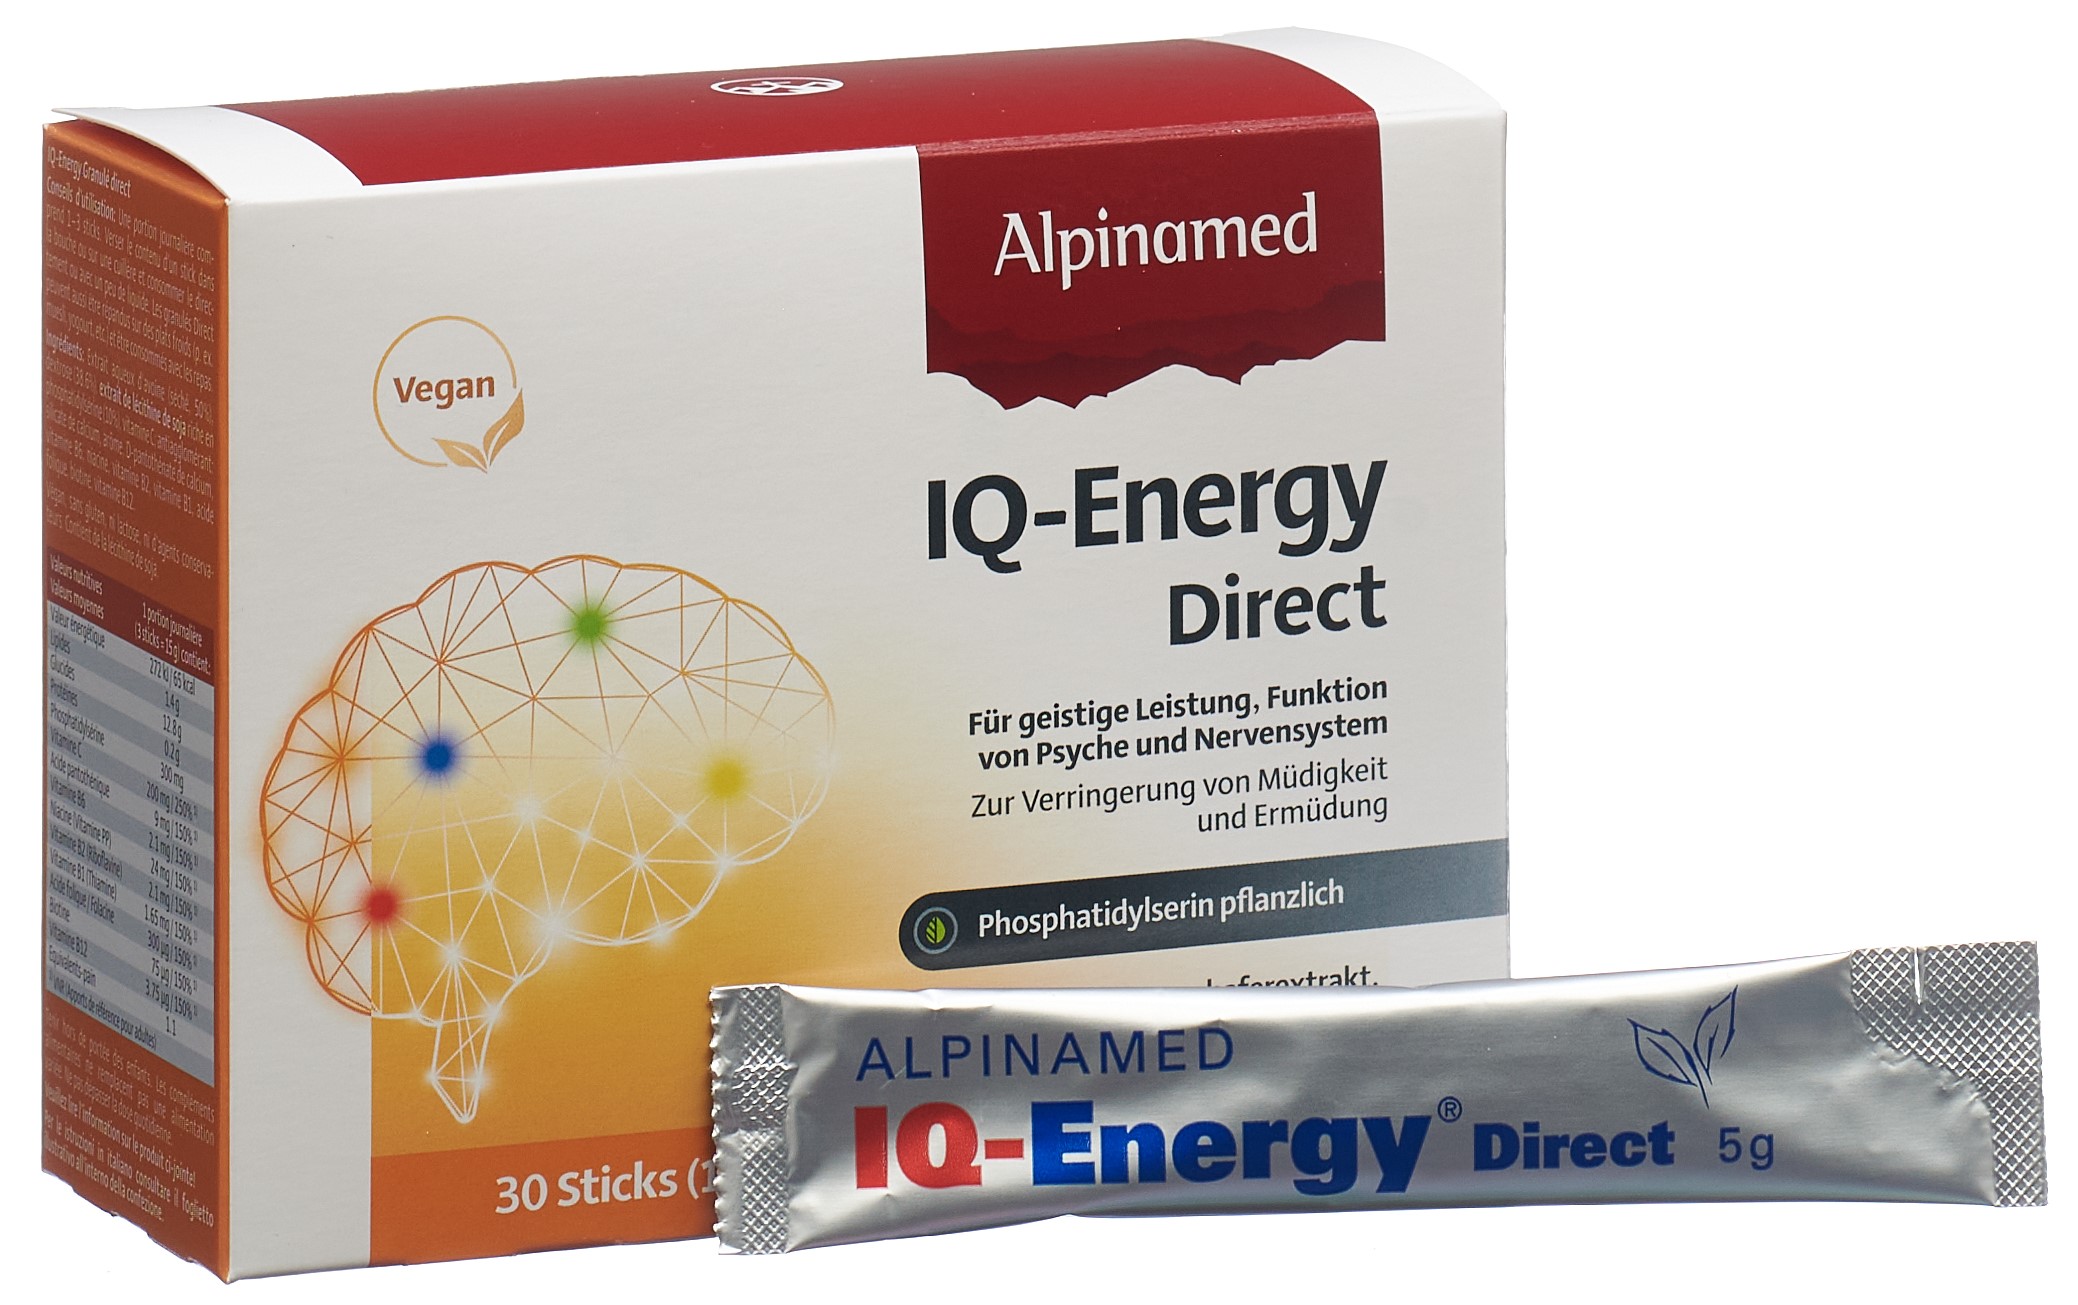 ALPINAMED IQ-Energy Direct, image 2 sur 3